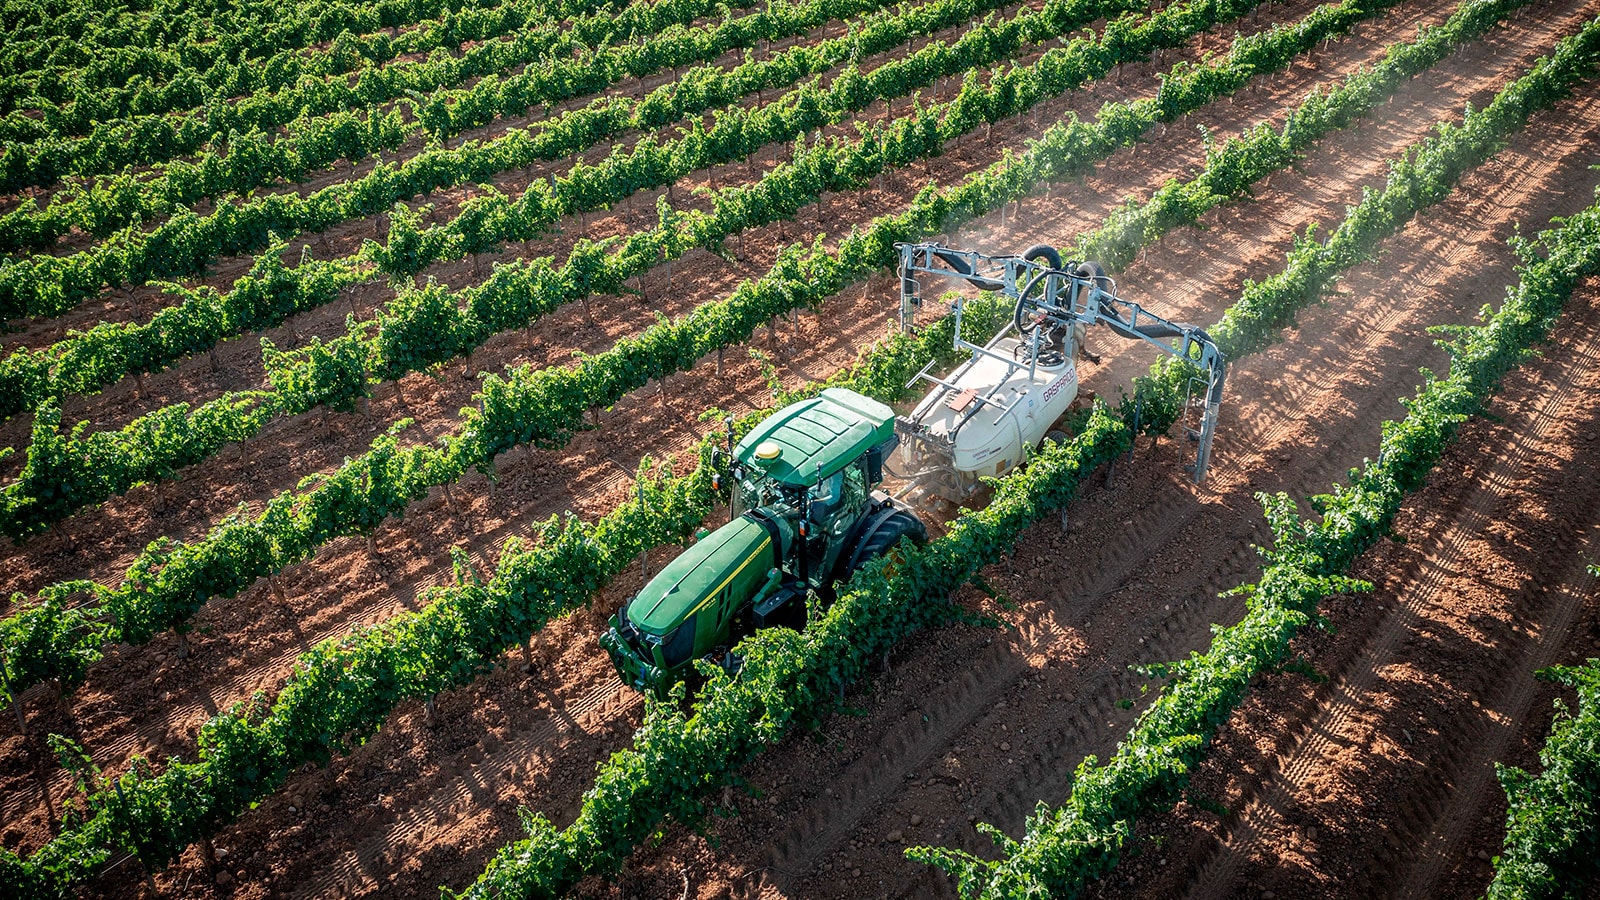 John Deere adds orchard and vineyard specialist with new 5ML